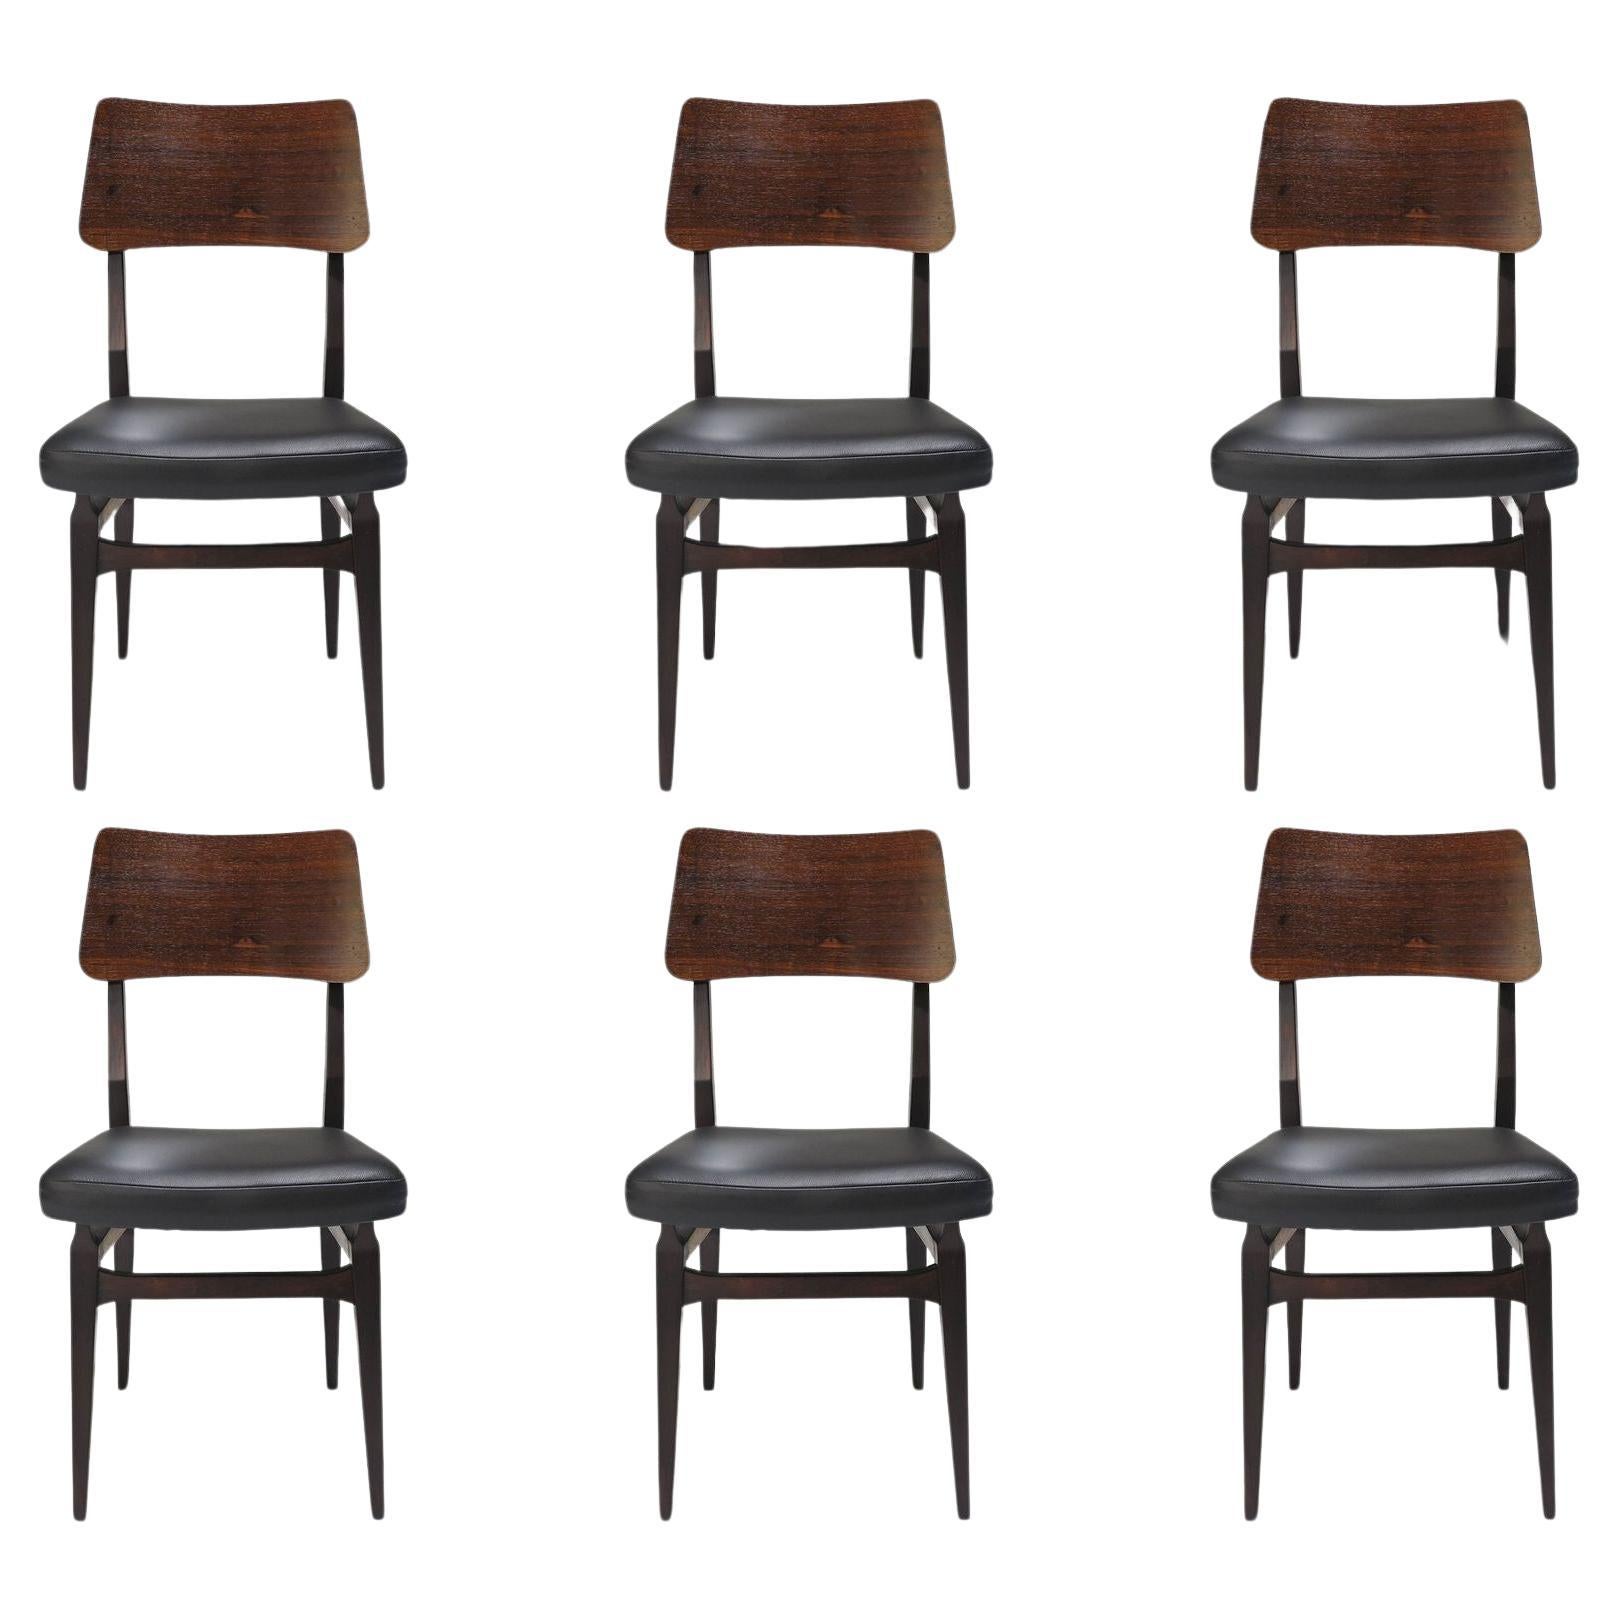 Forma Brazil Rosewood Dining Chairs For Sale